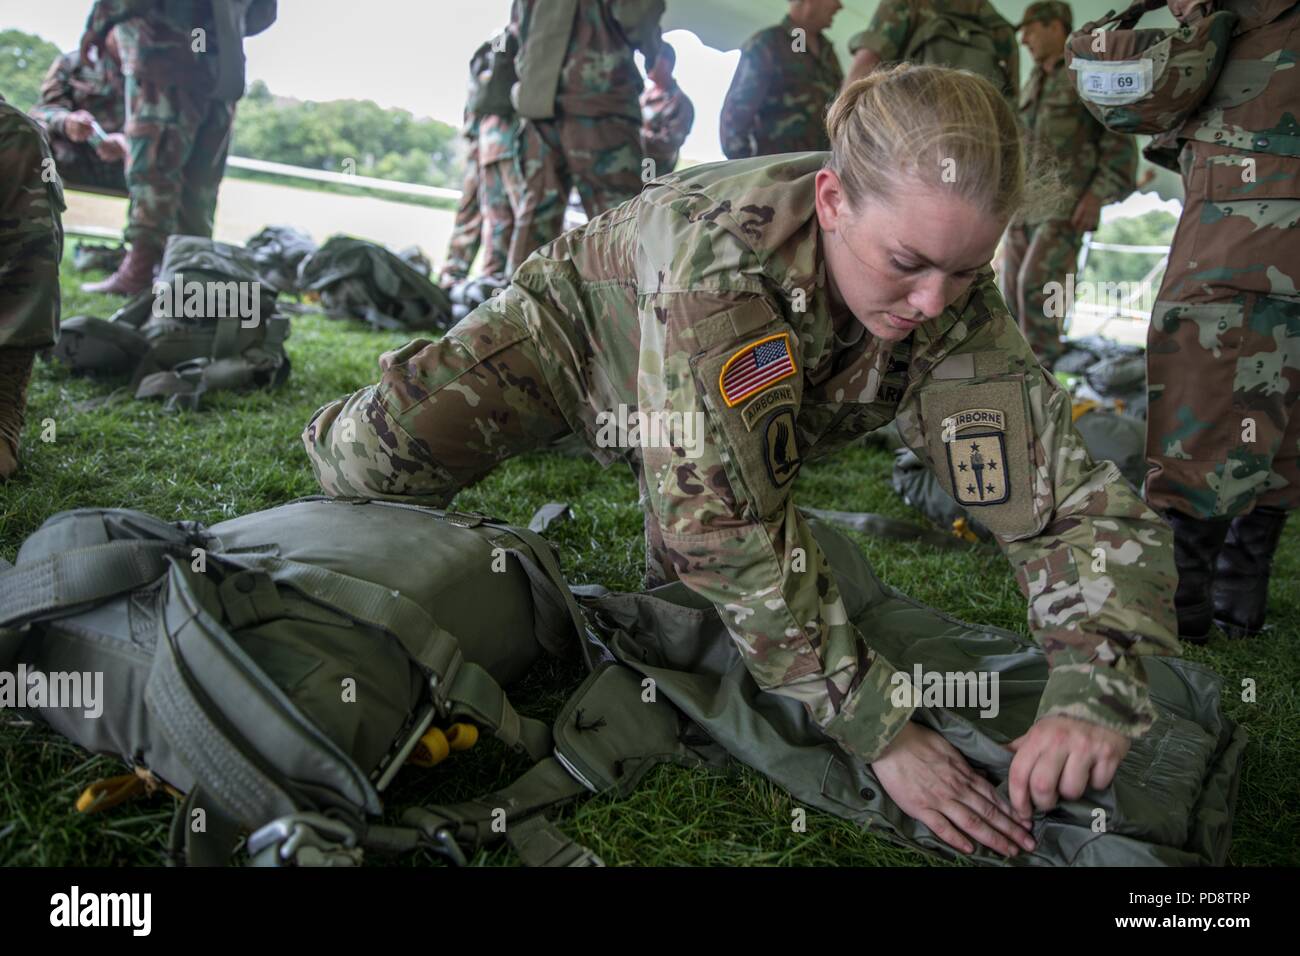 U.S. Army Staff Sgt. Charli Boyer, assigned to the Aerial Delivery and Field Services Department, U.S. Army Quartermaster School, prepares a parachute for the next day's jump during Leapfest at the University of Rhode Island, West Kingston, R.I. Aug. 4, 2018, August 4, 2018. Leapfest is the largest, longest standing, international static line parachute training event and competition hosted by the 56th Troop Command, Rhode Island Army National Guard to promote high level technical and esprit de corps within the International Airborne community. (U.S. Army photo by Sgt. Josephine Carlson). () Stock Photo